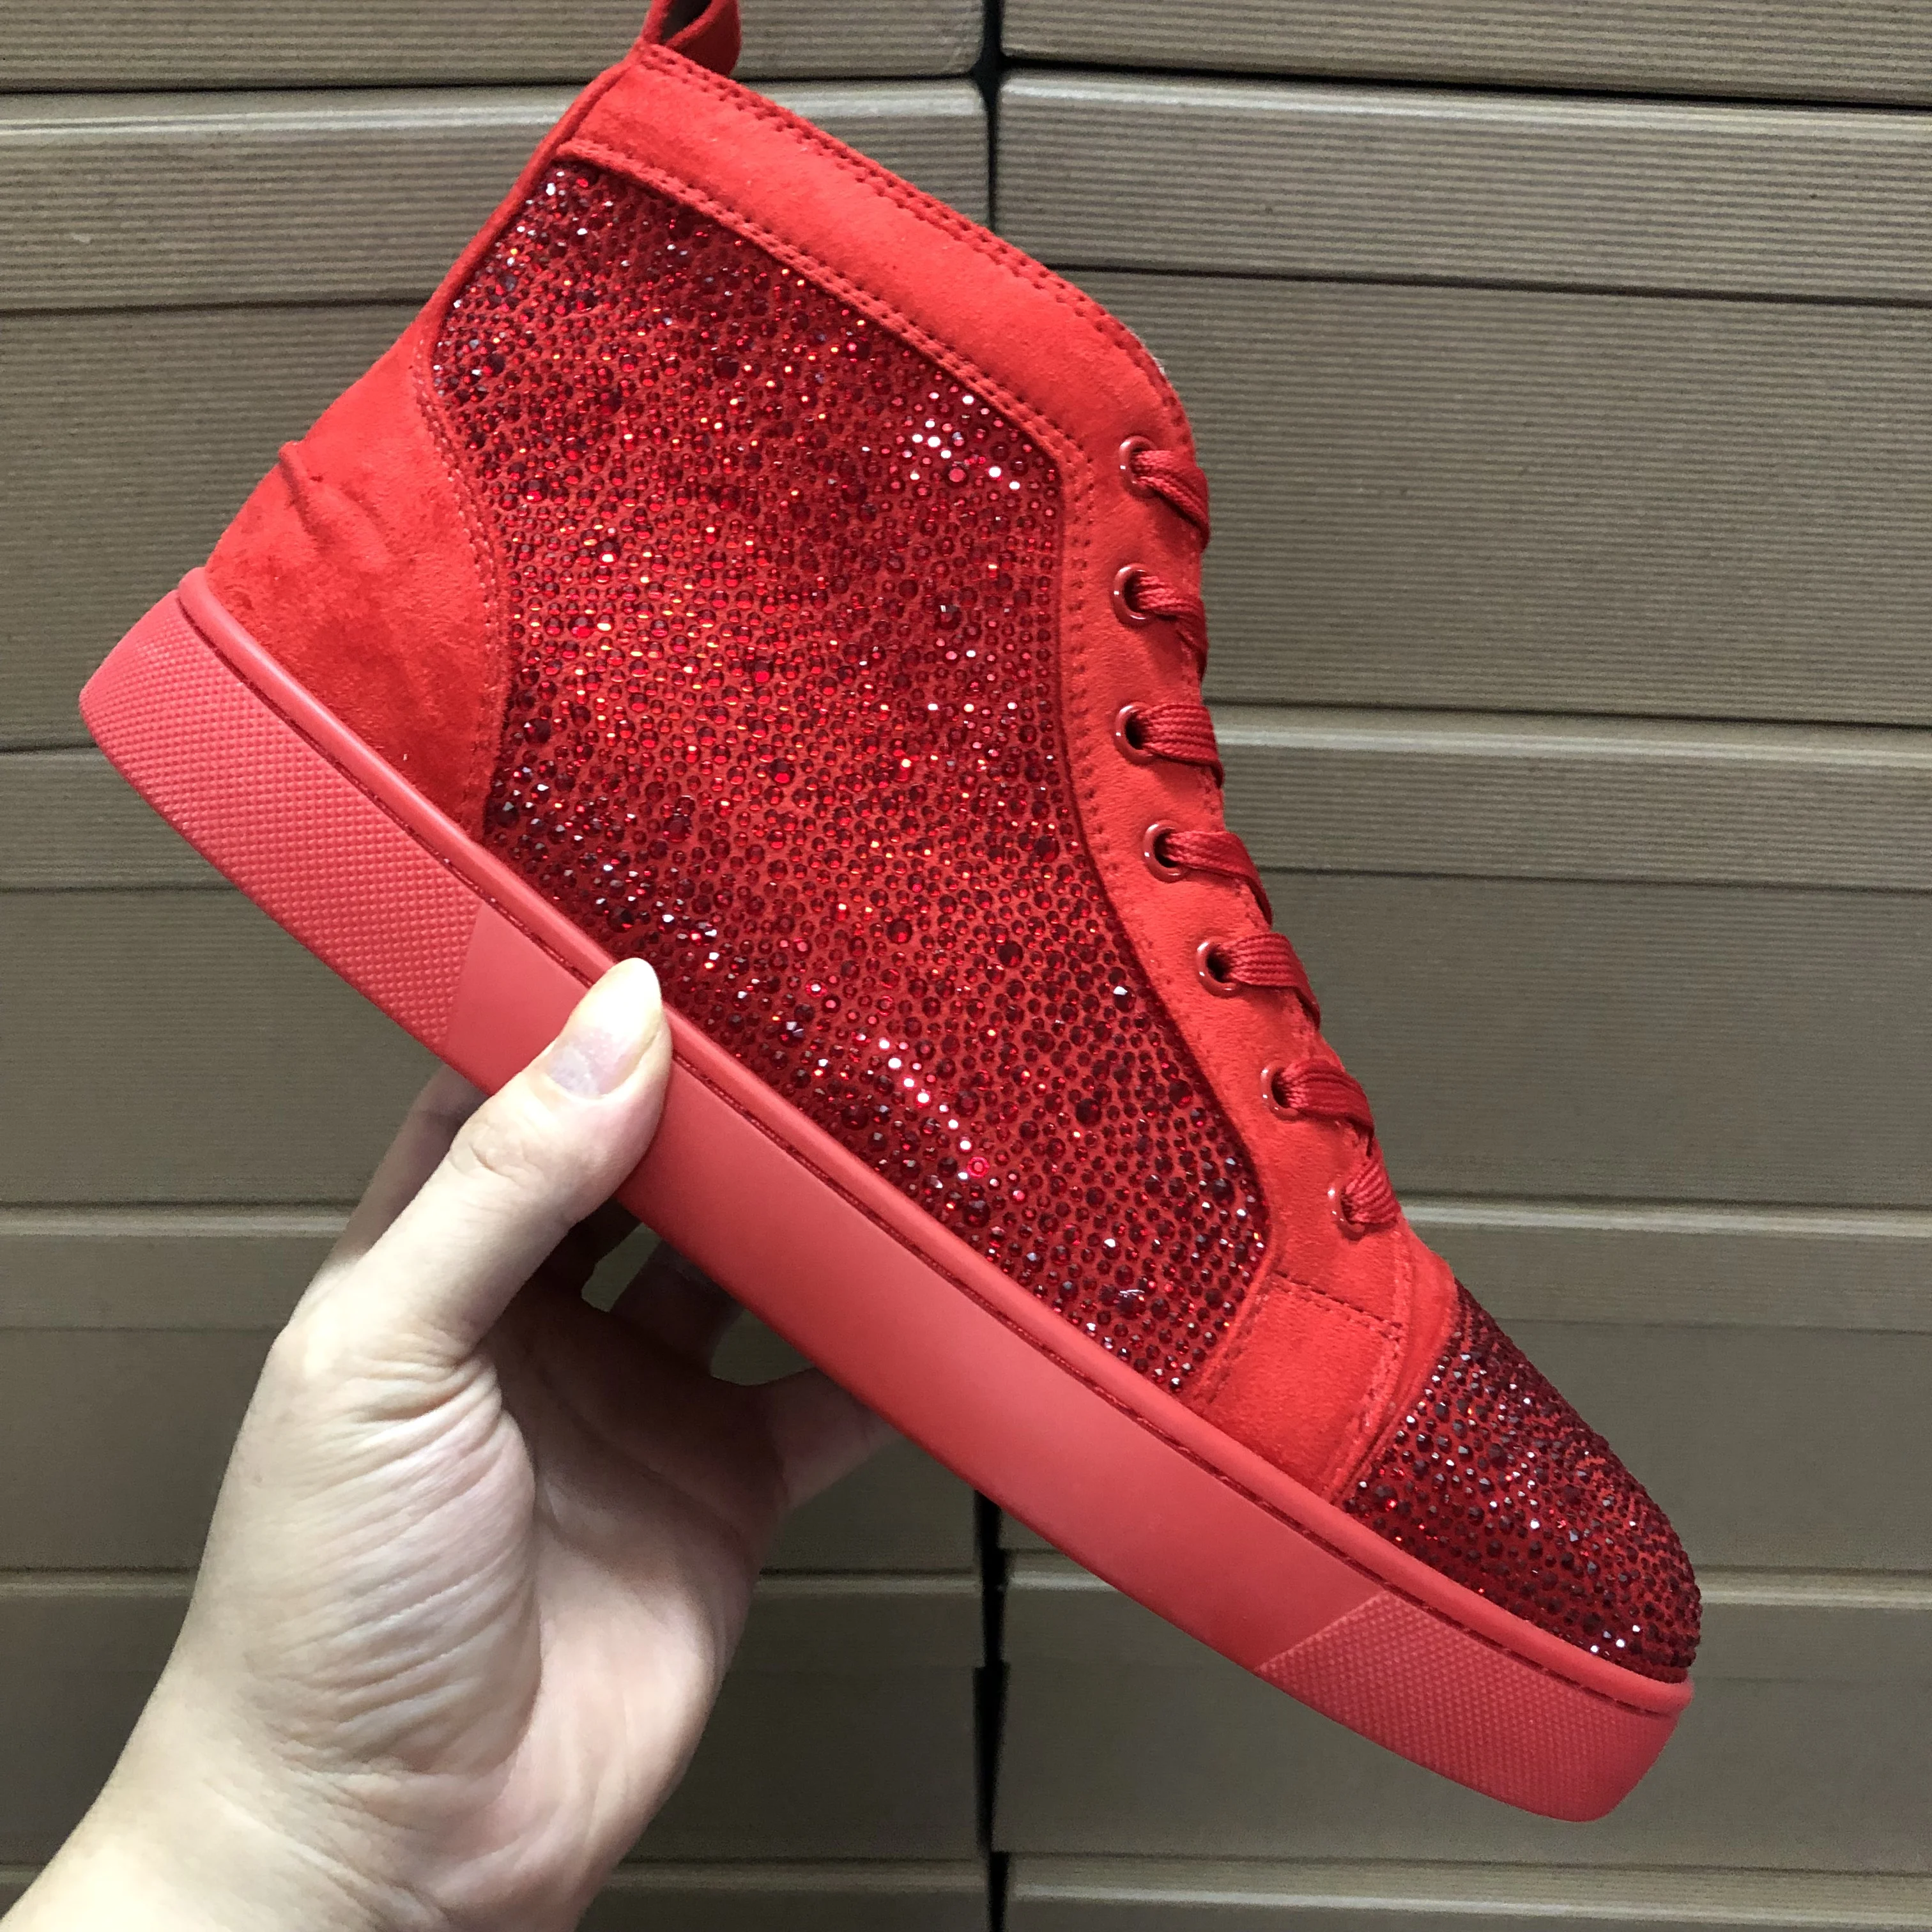 

Wholesale Leather High Top Rhinestones Brand Mens Red Bottoms Spikes Shoes Famous Brands Luxury Designer Sneakers for Women, Black,red,white,blue